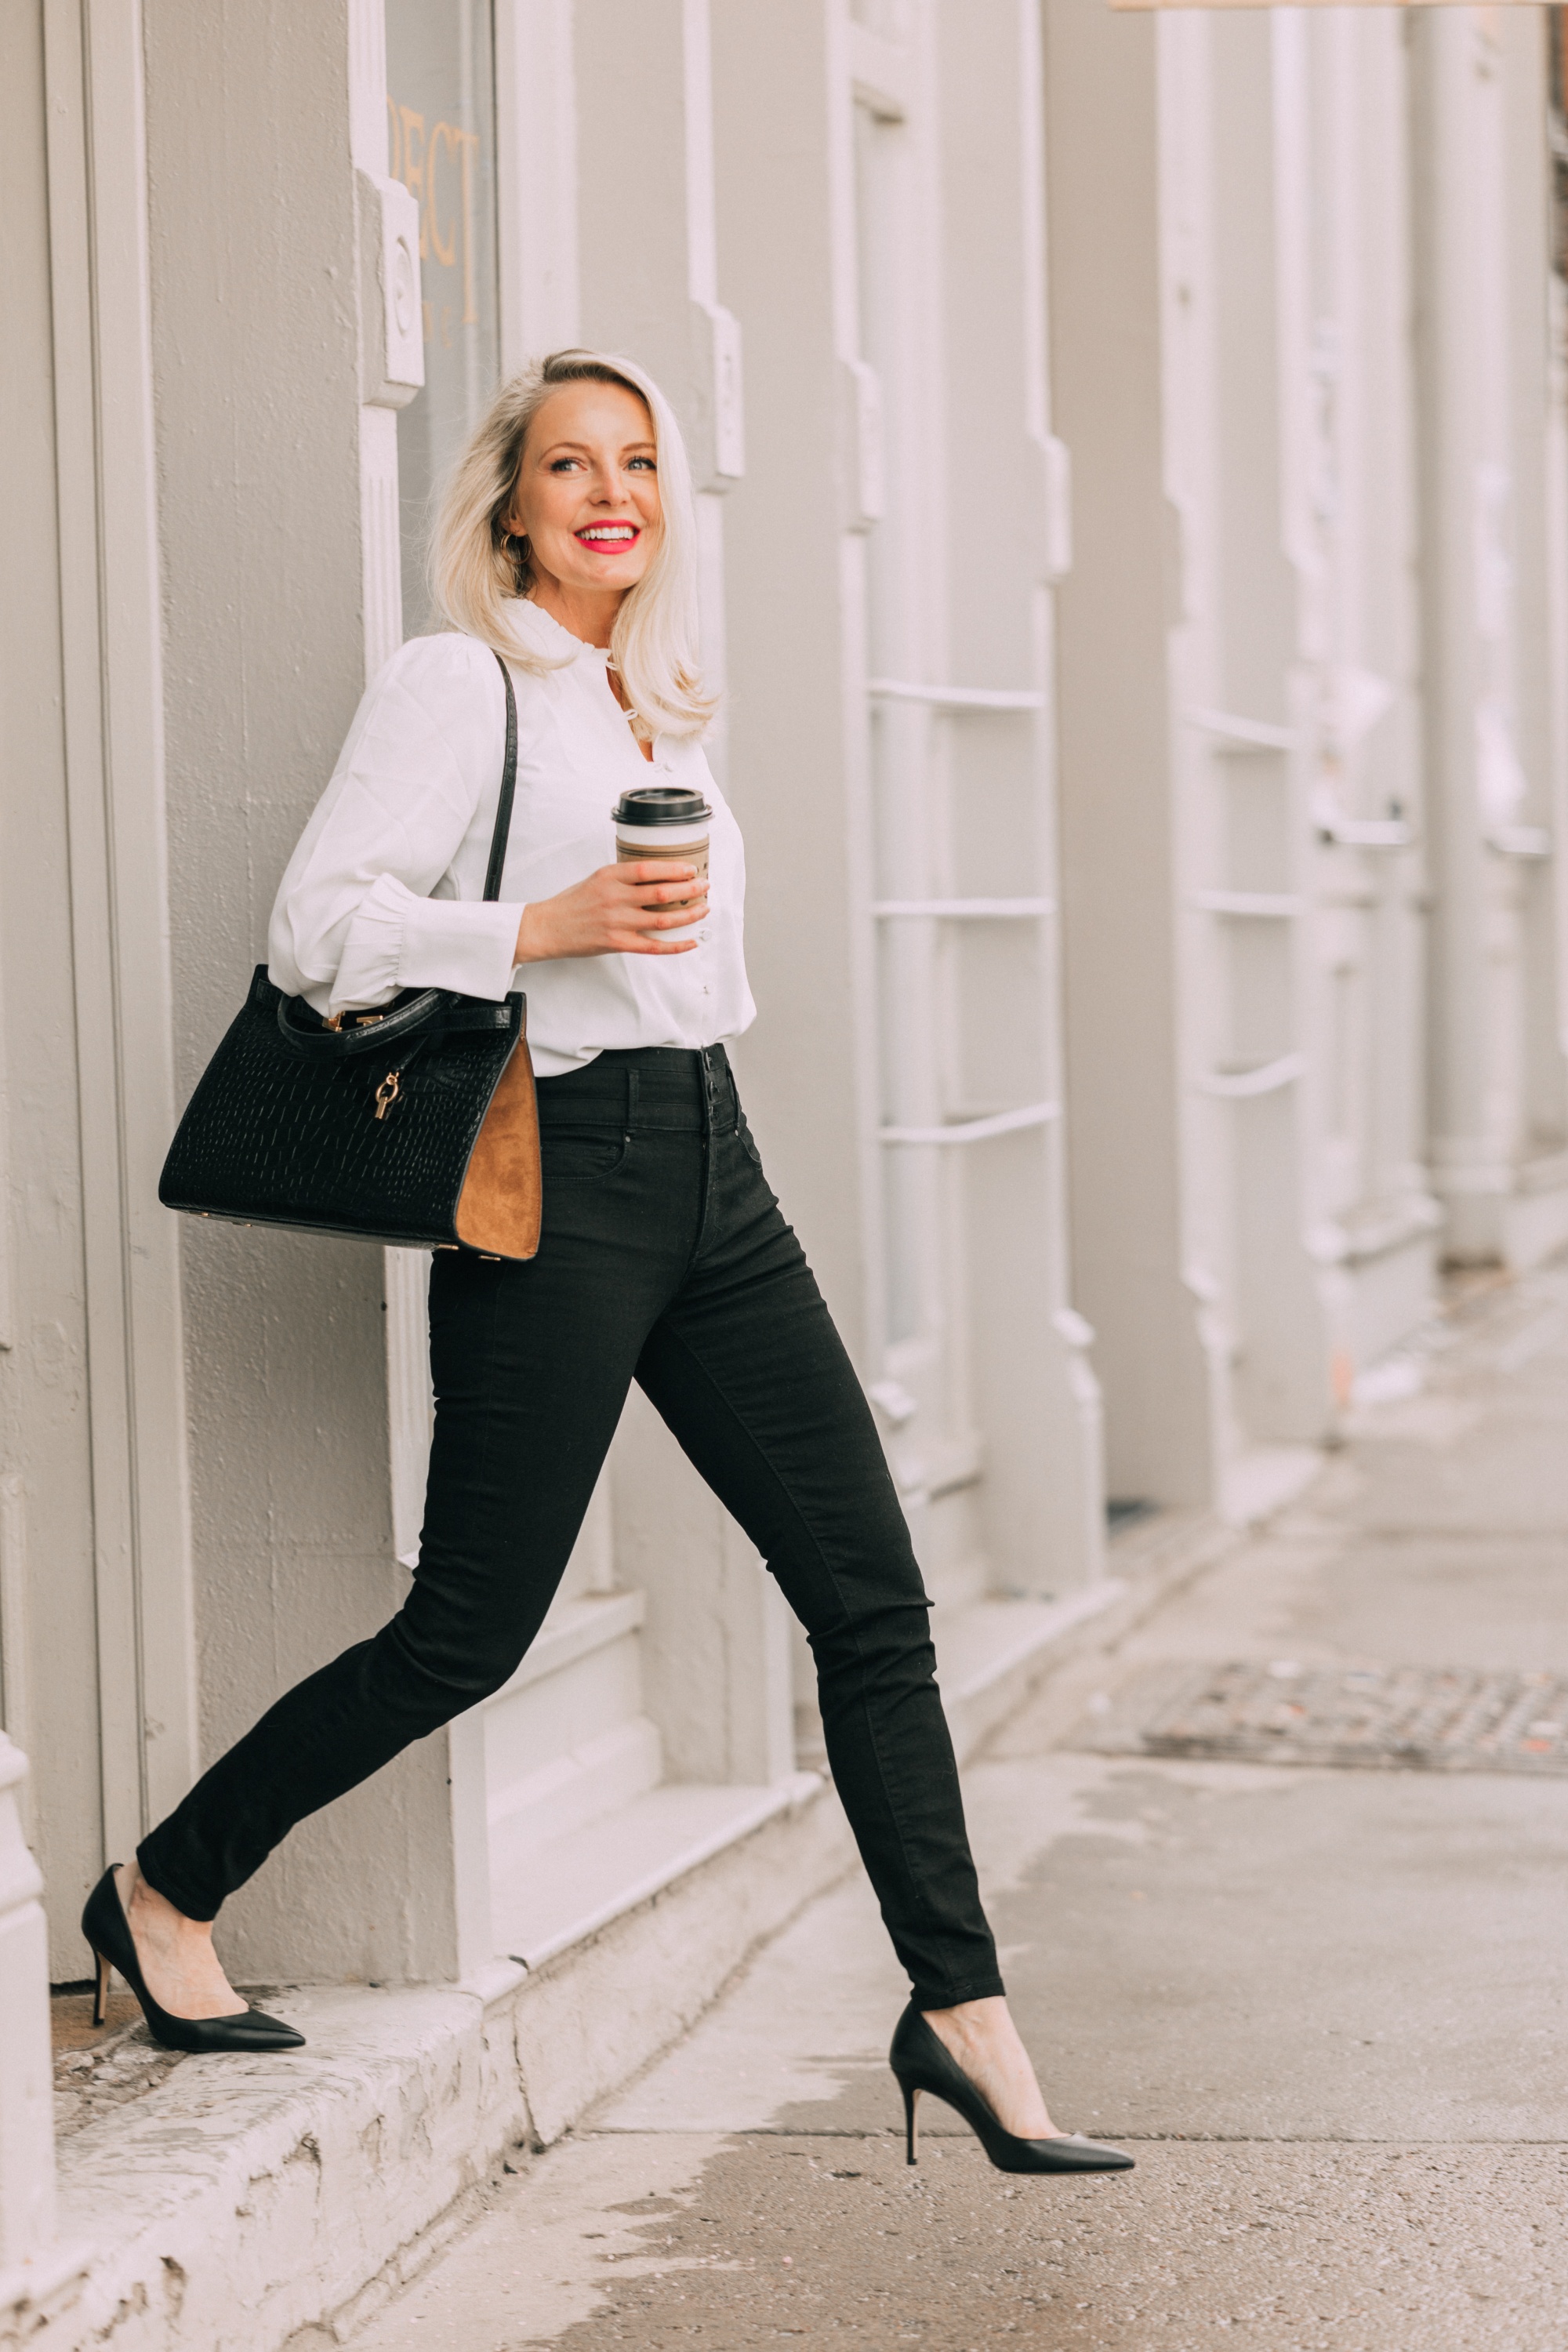 Tory Burch Lee Radziwell Bag in black croc embossed leather with brown on fashion blogger over 40 Erin Busbee of busbee Style, bags you should own